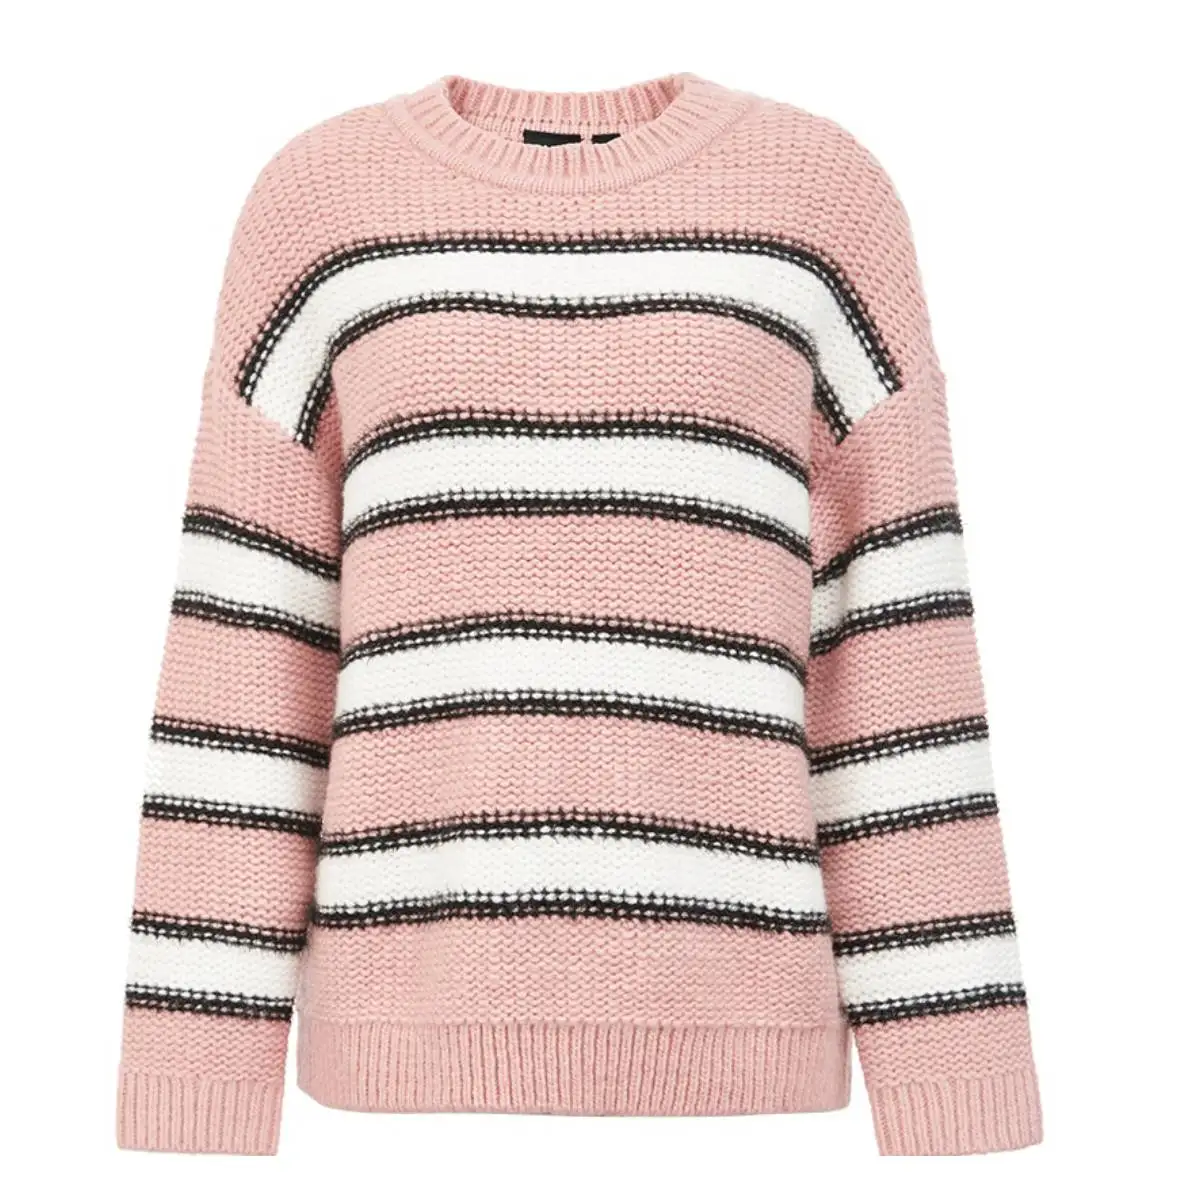 ONLY winter Loose Fit Striped Knit Sweater  119313532 Женская